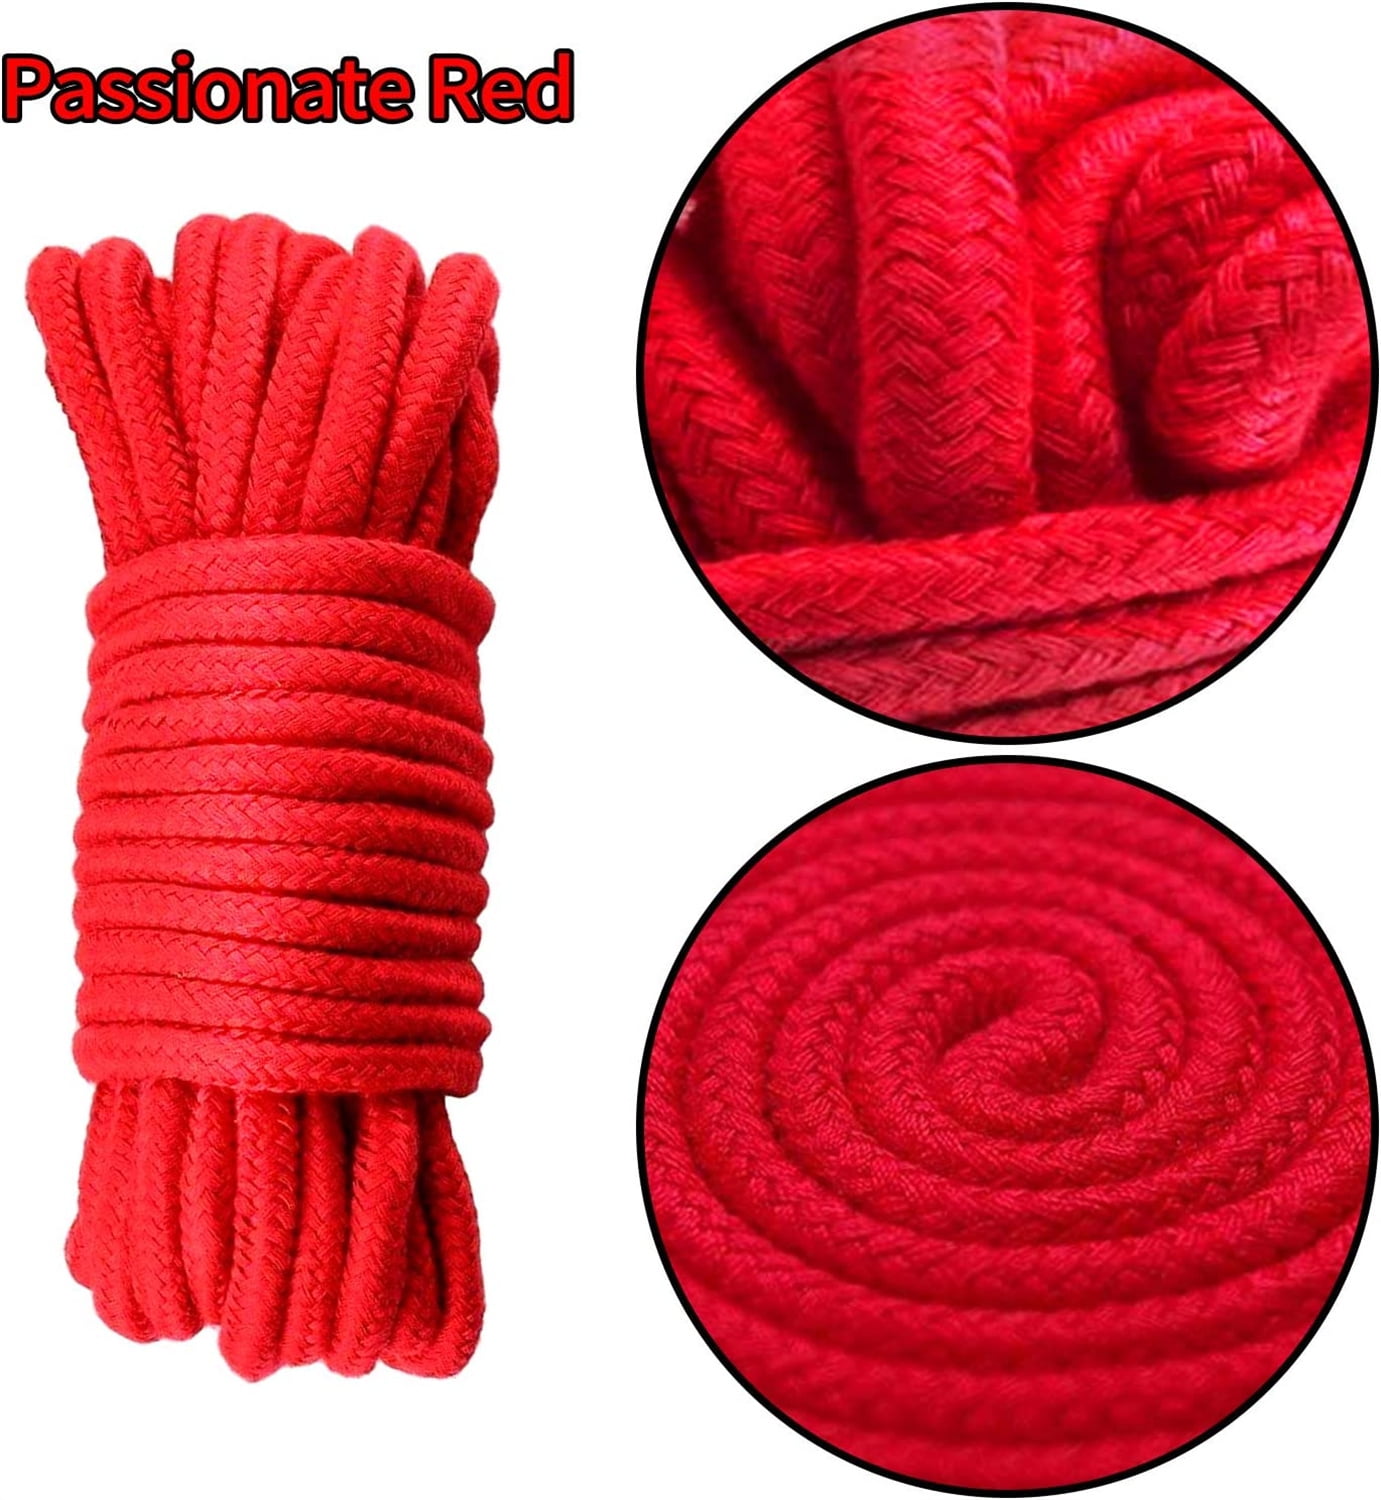 Casewin Braided Twisted Silk Ropes 8mm Diameter Soft Solid Braided Twisted  Ropes Decorative Twisted Satin Shiny Cord Rope for All Purpose and DIY